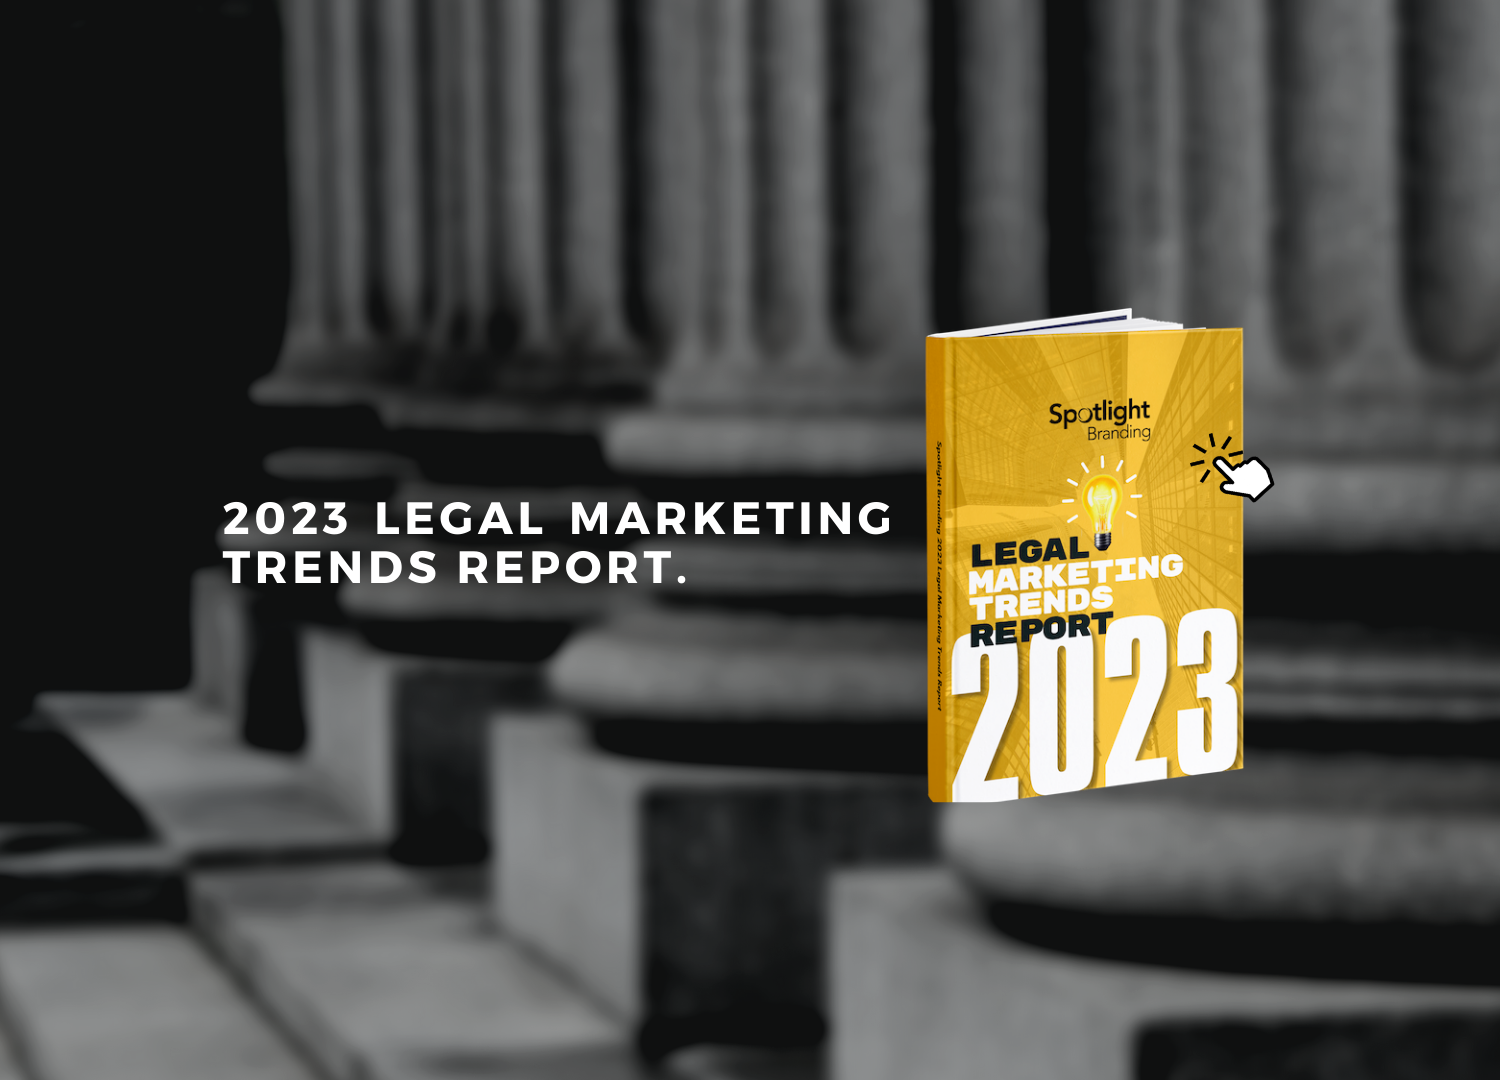 The Best Report in Legal Marketing Is Here!